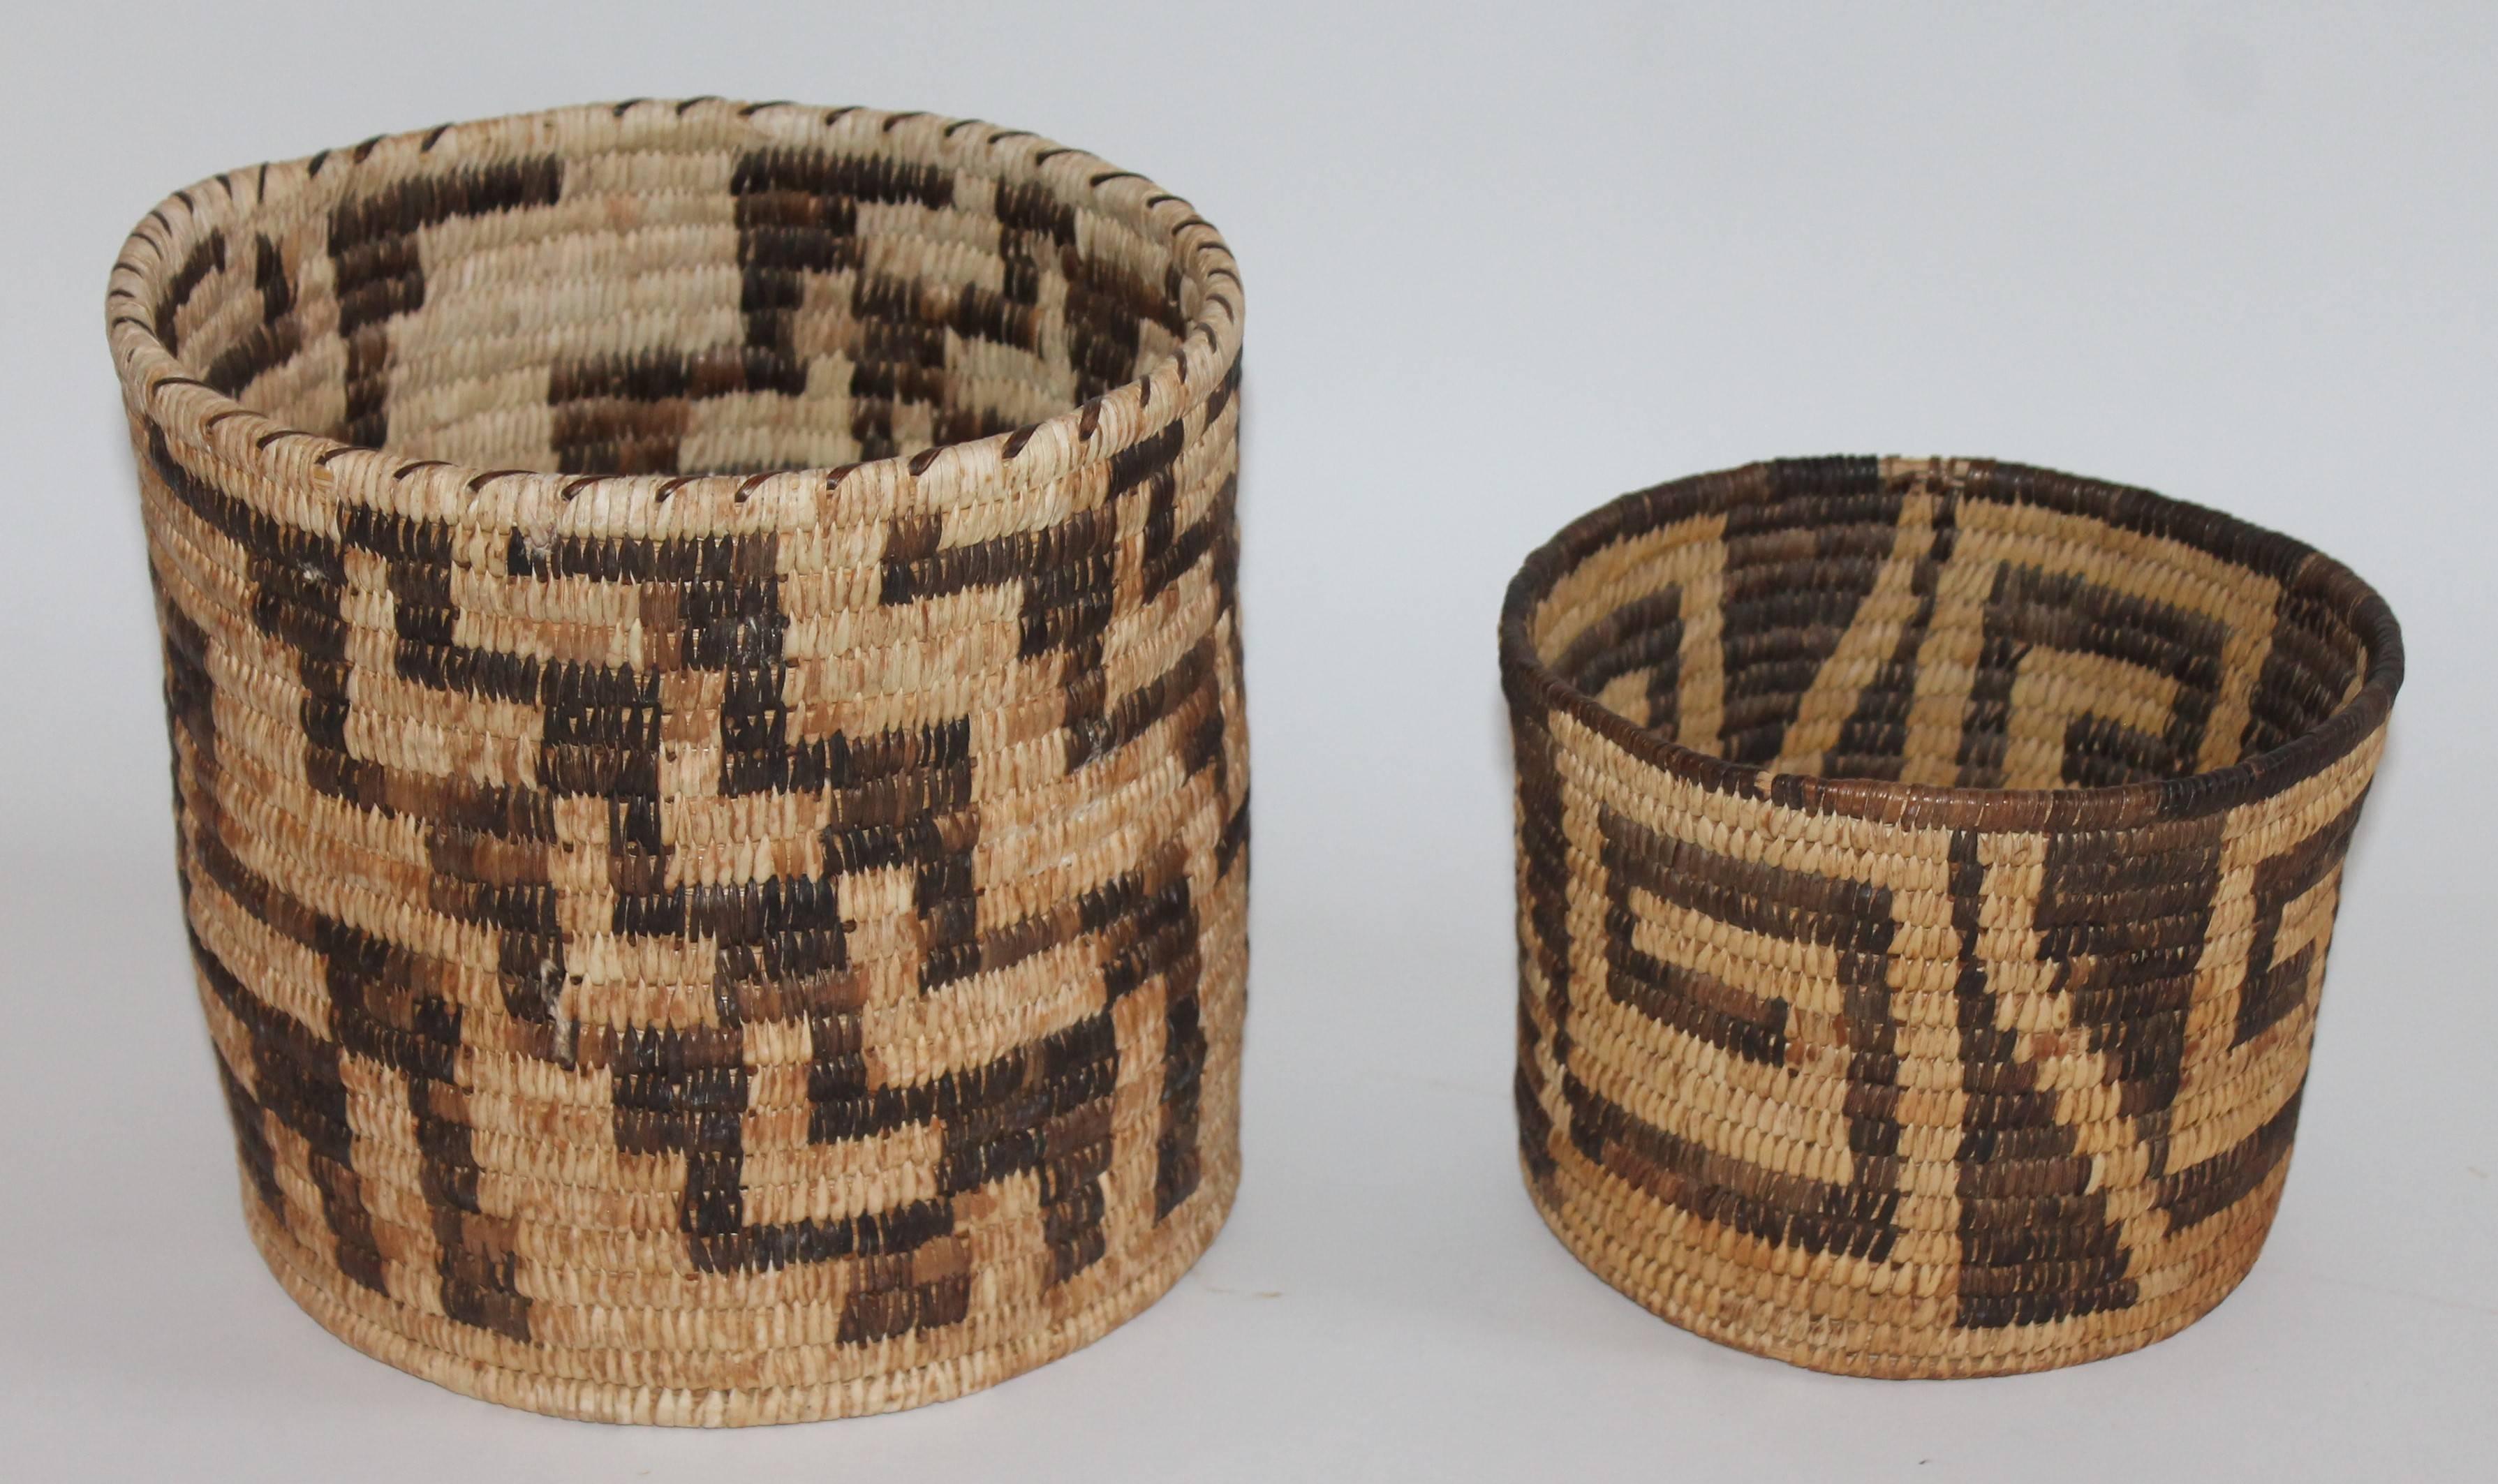 These two Indian baskets are in great as found condition and have a wonderful aged patina. One is tall and measures: 8.5 high x 8.5 and the small geometric 5.5 high x 7 diameter.